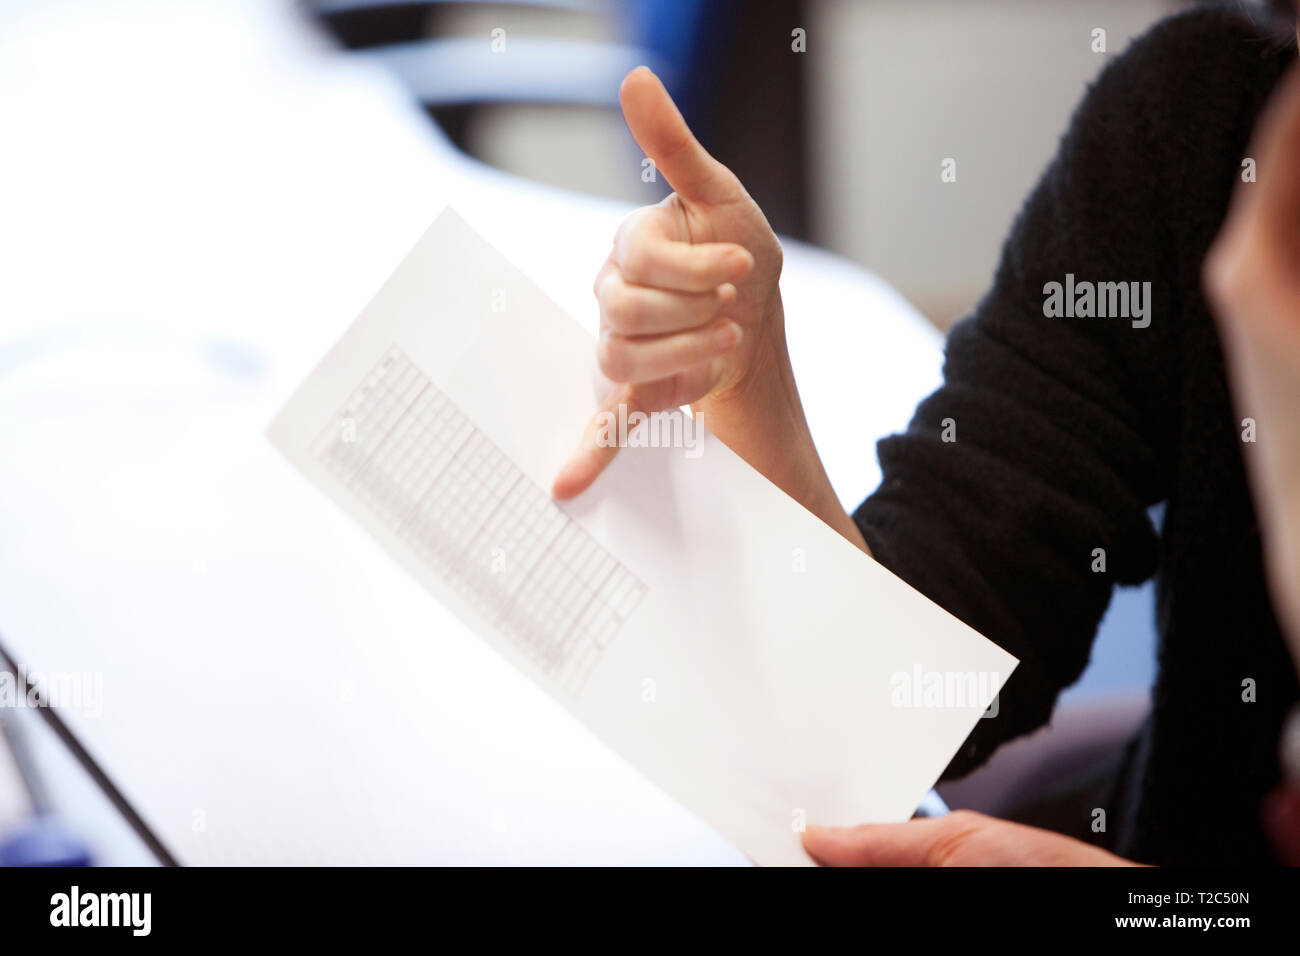 Making a point using hands during office meeting Stock Photo